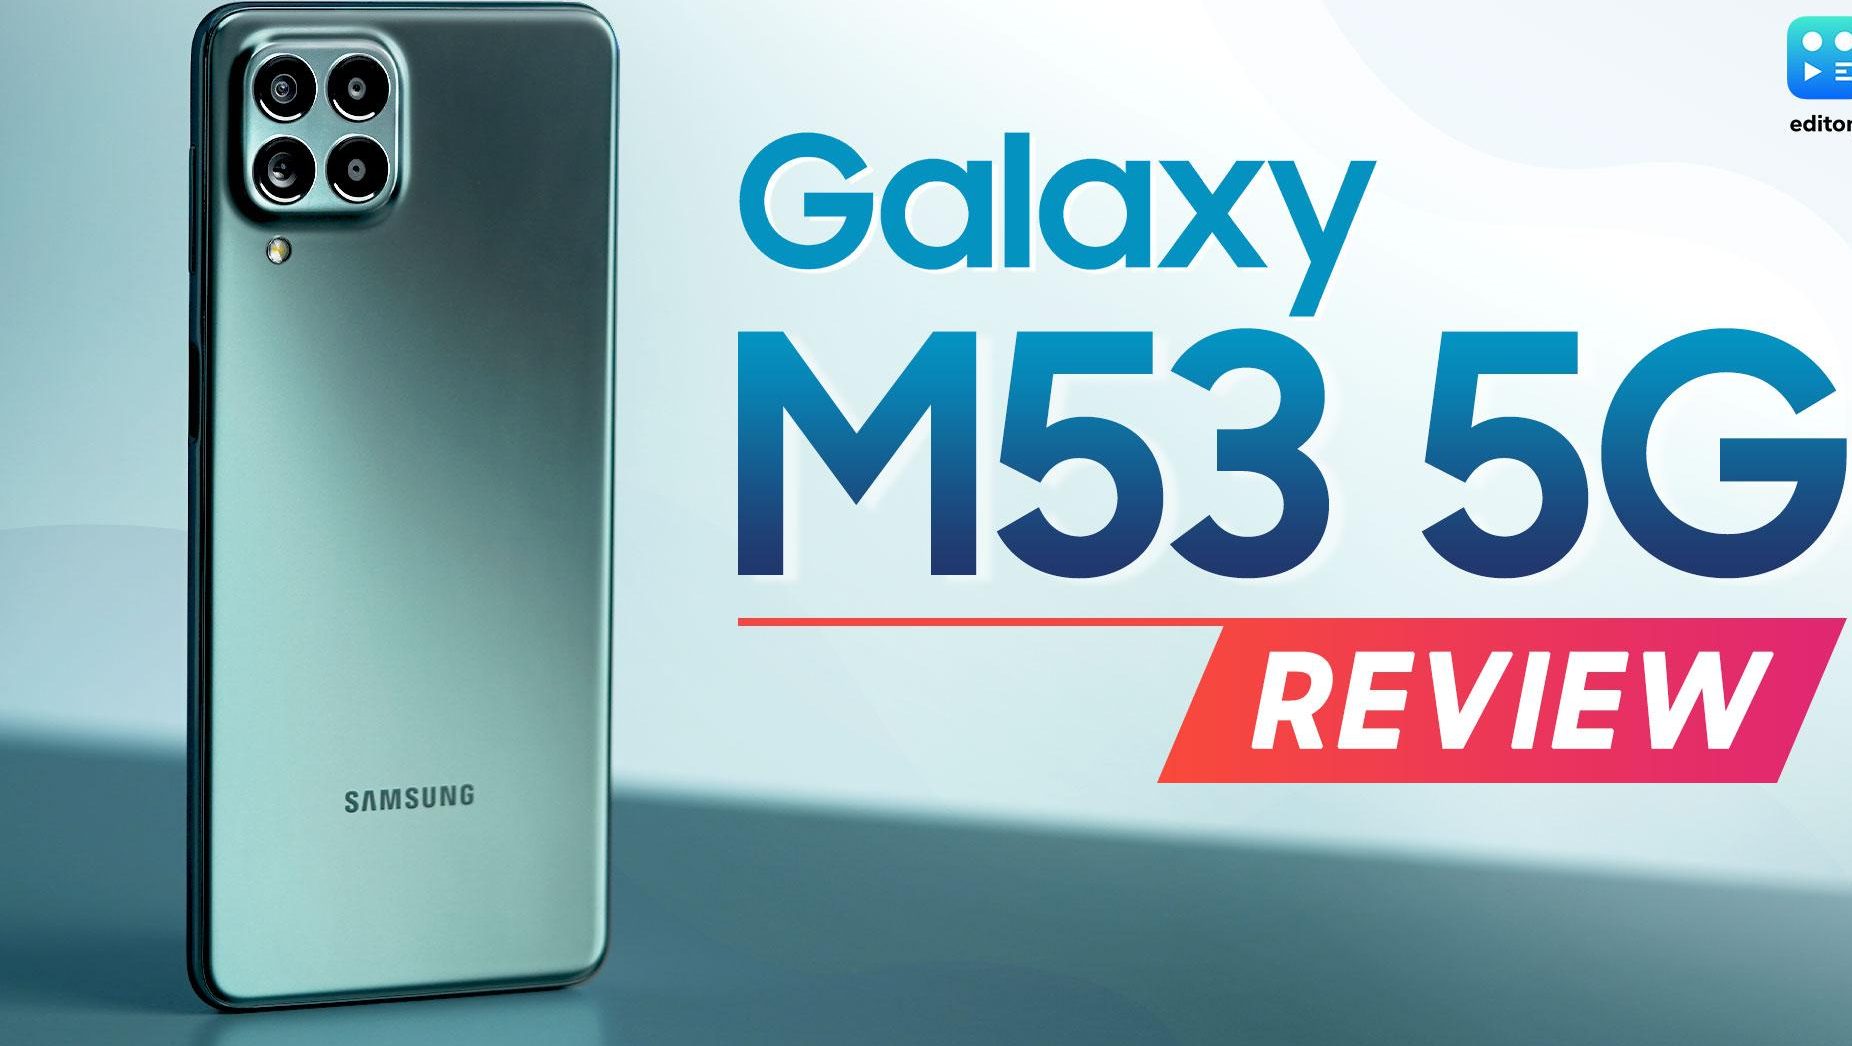 Samsung Galaxy M53 Mobile Review1